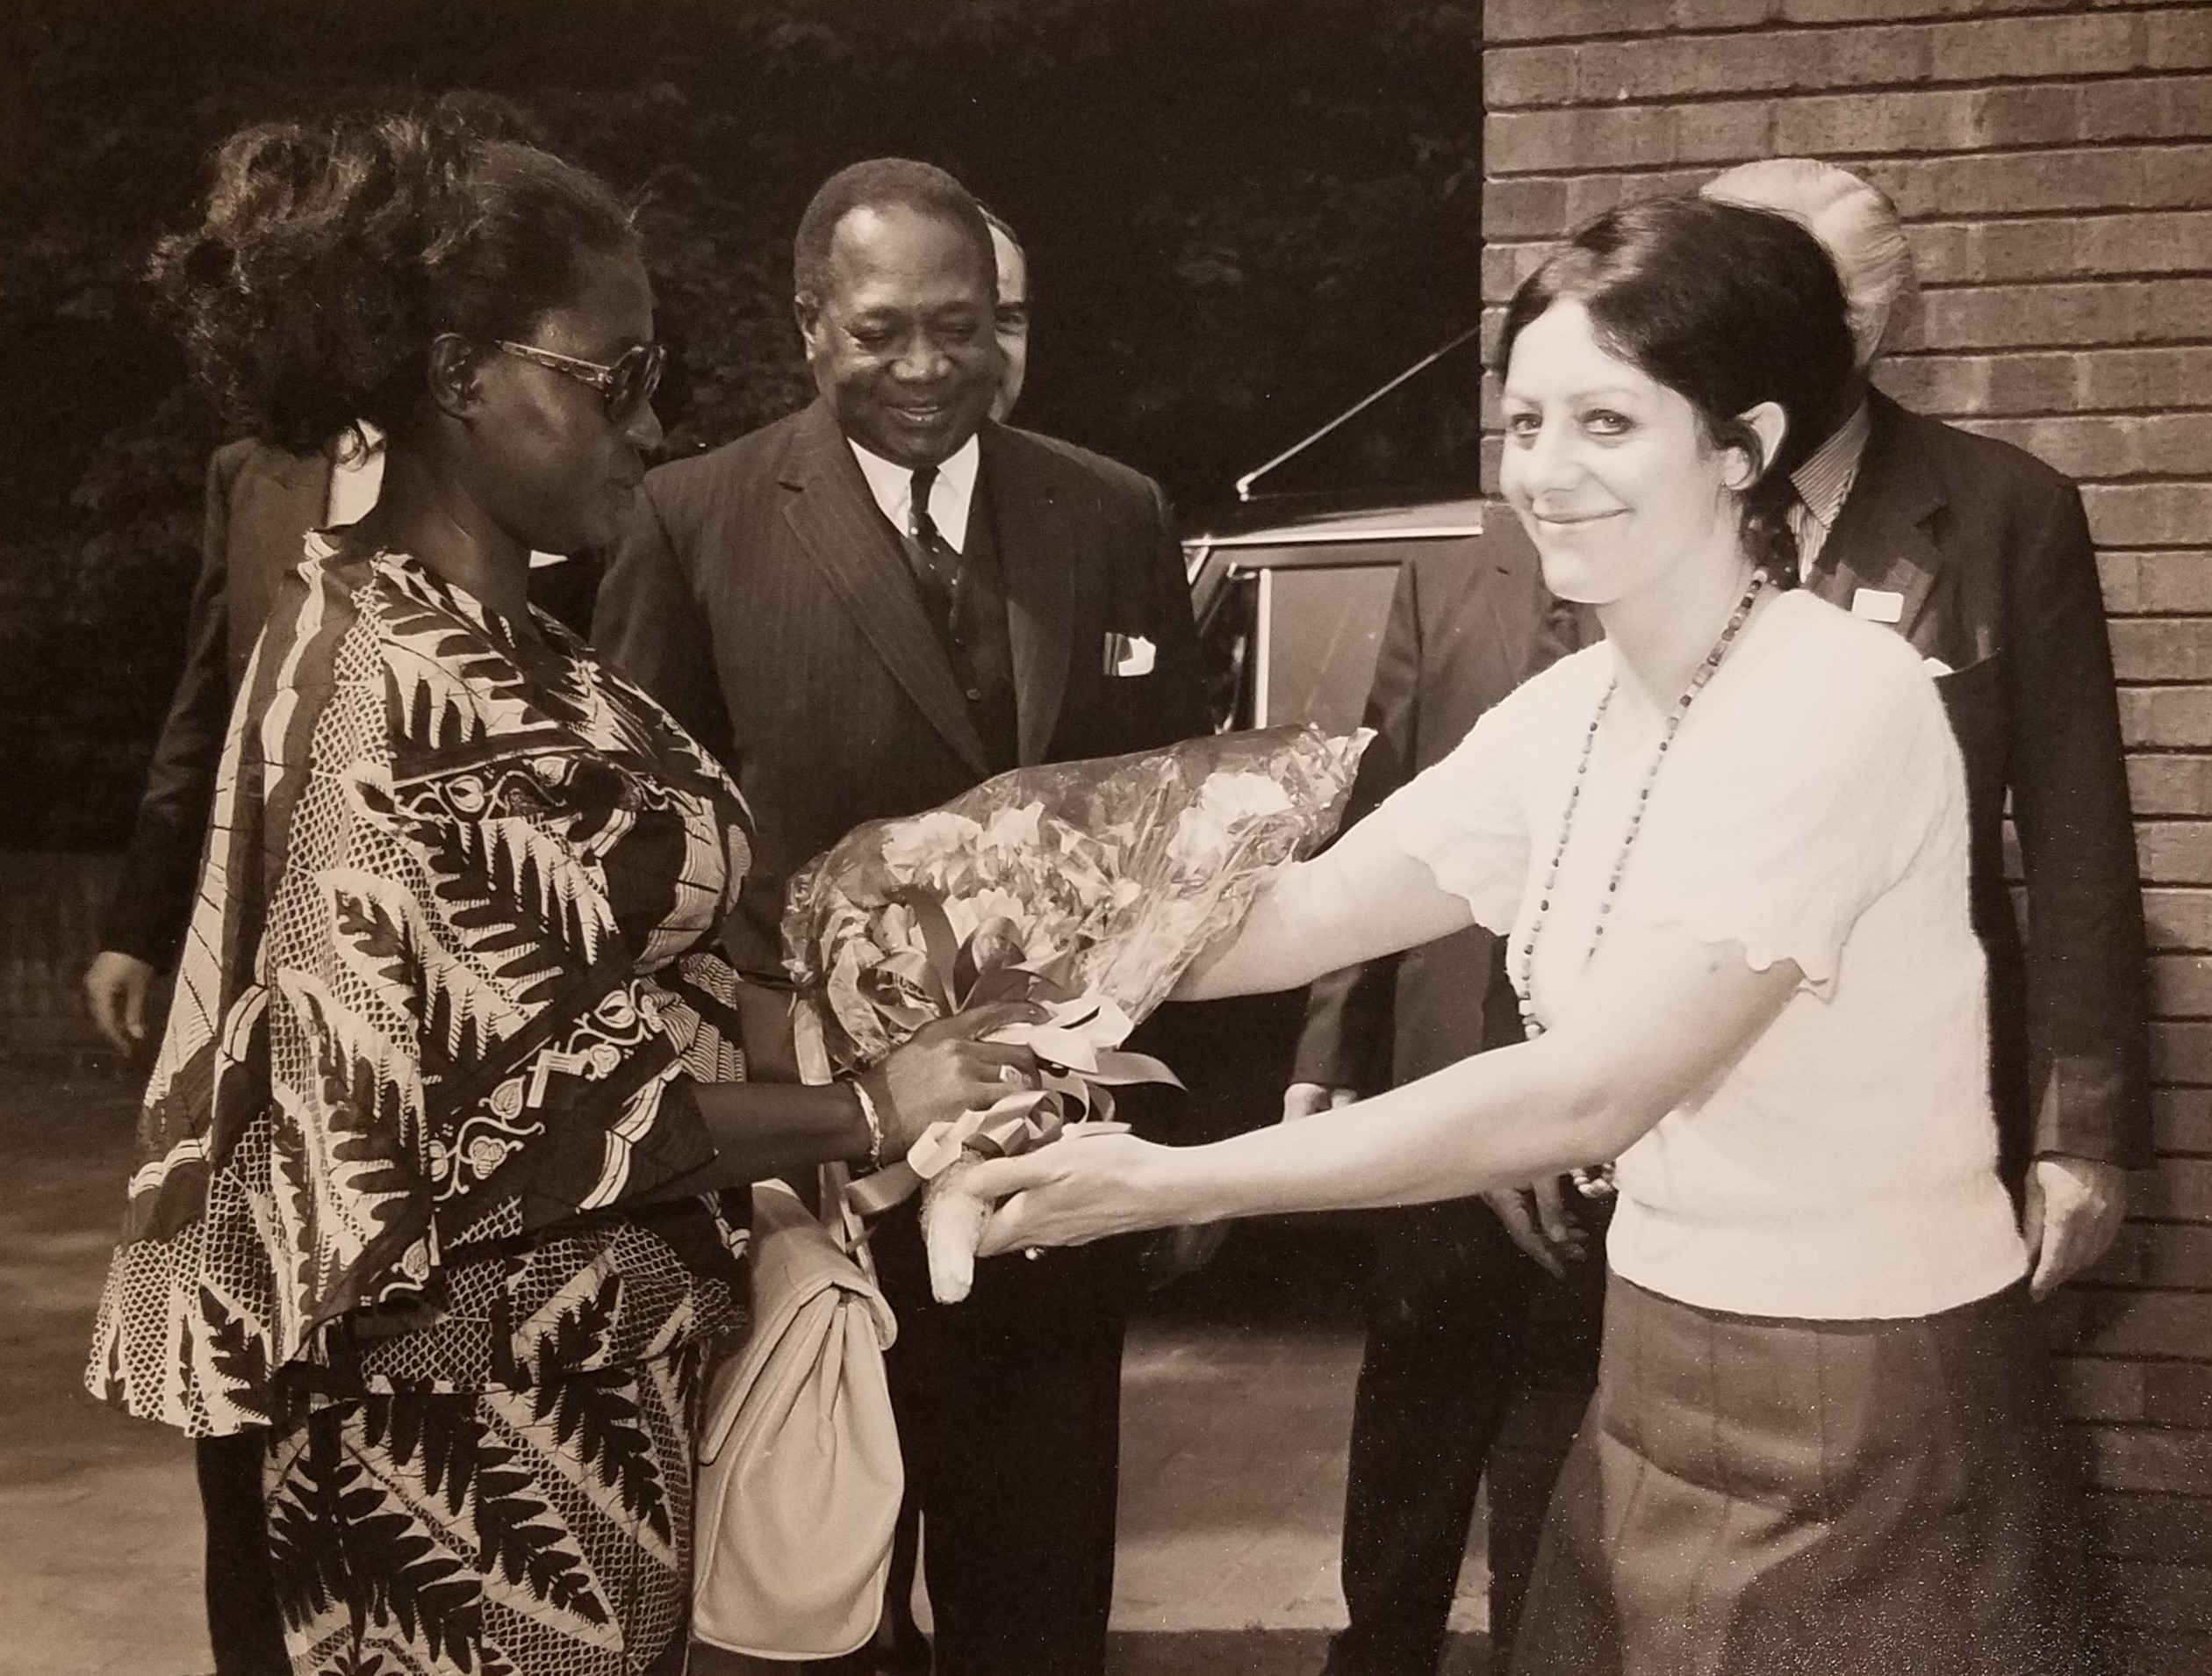 Otomfuo Opoku Ware II, Asantahene - Traditional Ruler of the Ashanti Region of Ghana with wife Victoria Poku in Redditch with with Mr Steven Andoh Private Secretary and Opanin Kofi  Tuo Officer of the Houshold